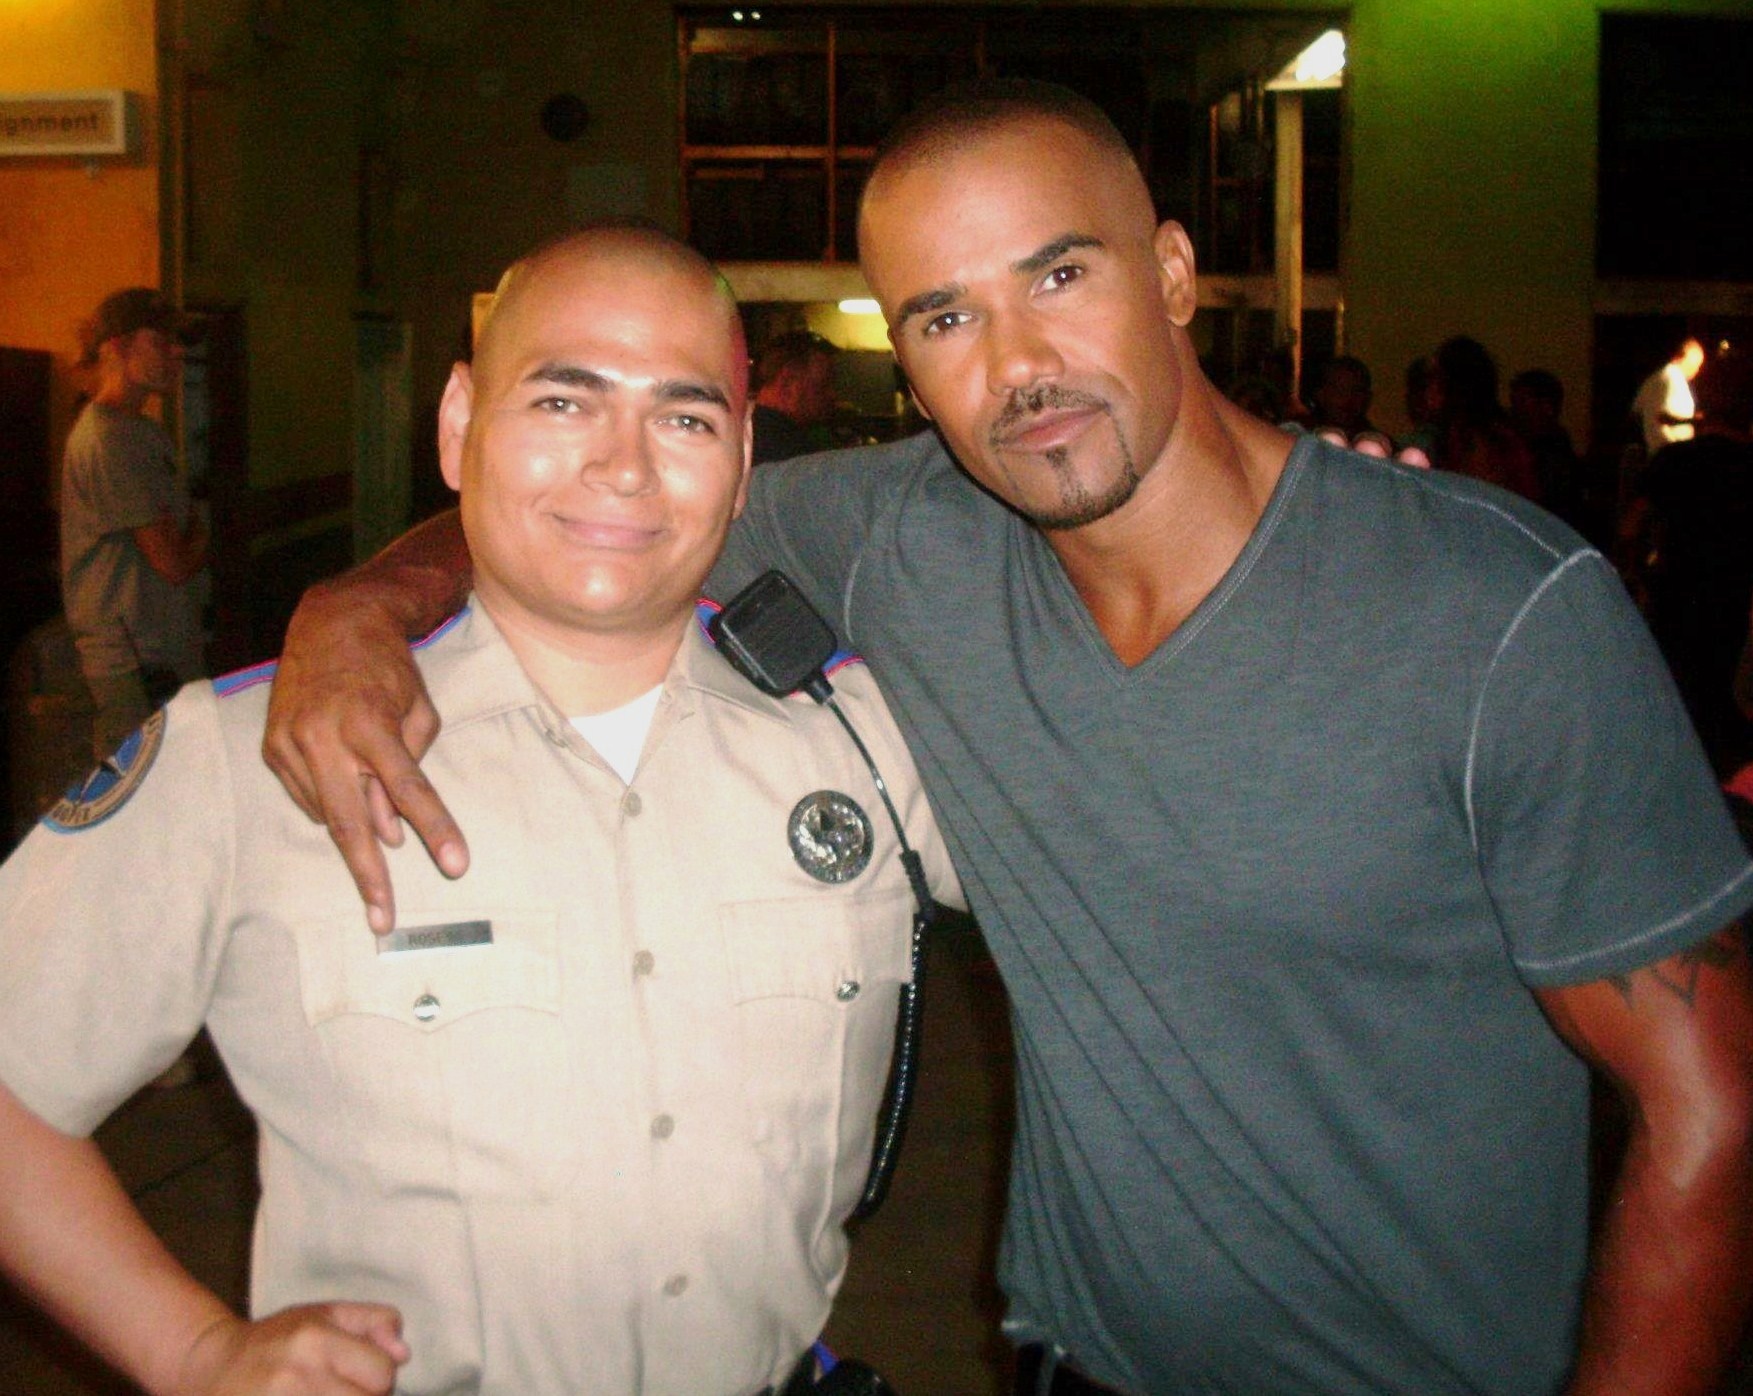 I always enjoy working with Shemar Moore, he is very nice and professional.